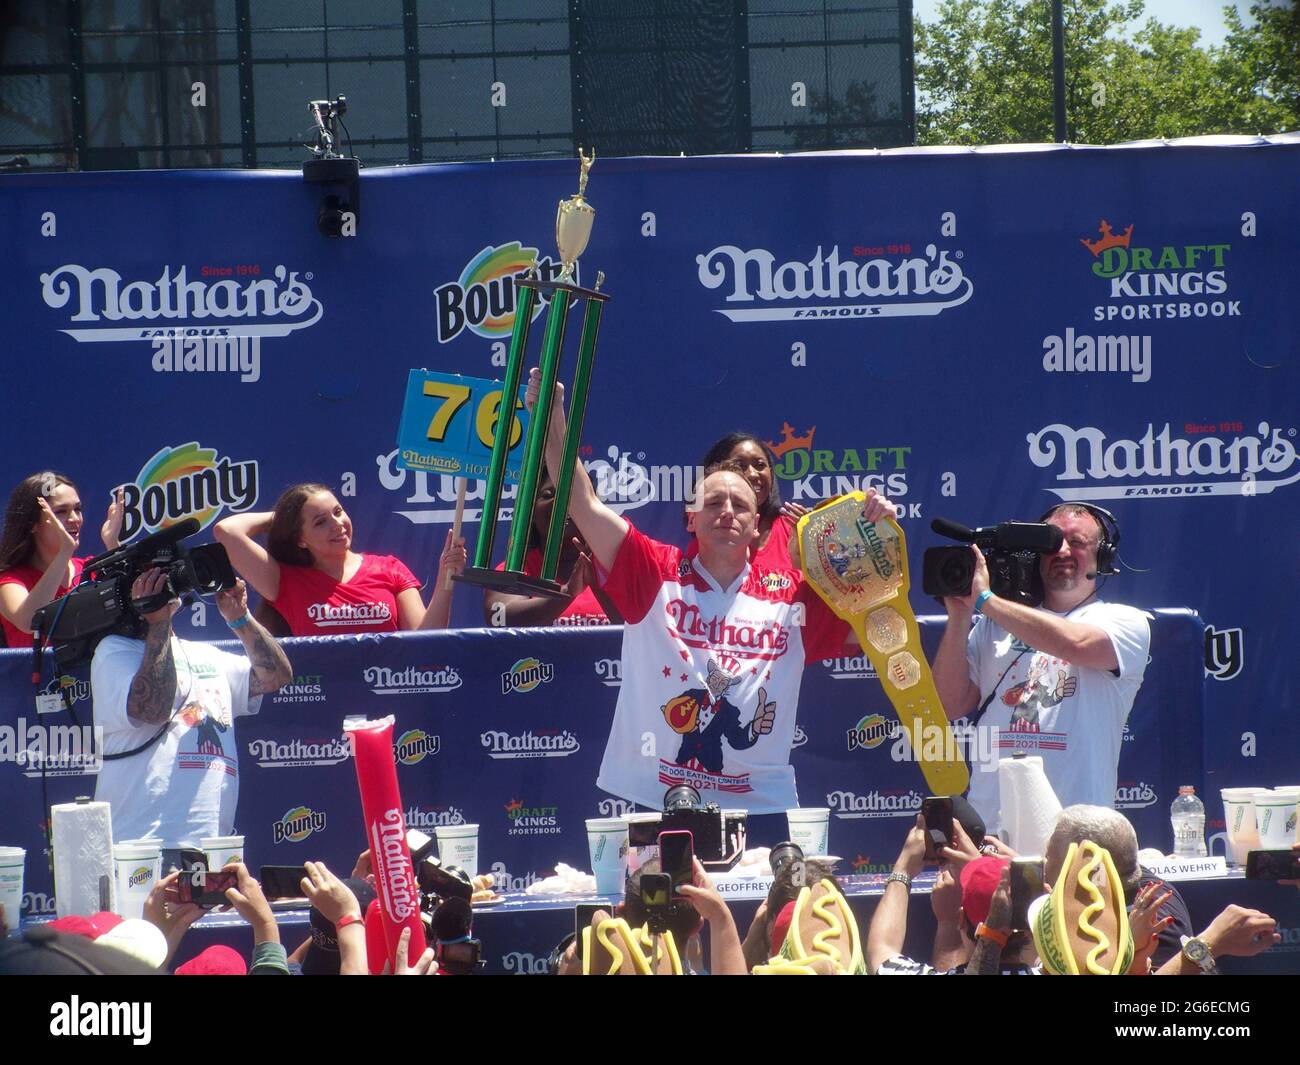 New York, New York, USA. 4th July, 2021. NATHAN'S FAMOUS FOURTH OF JULY CONTEST. AT ISLAND'S MAIMONIDES PARK.World champion Joey Chestnut will defend his title against the world's top